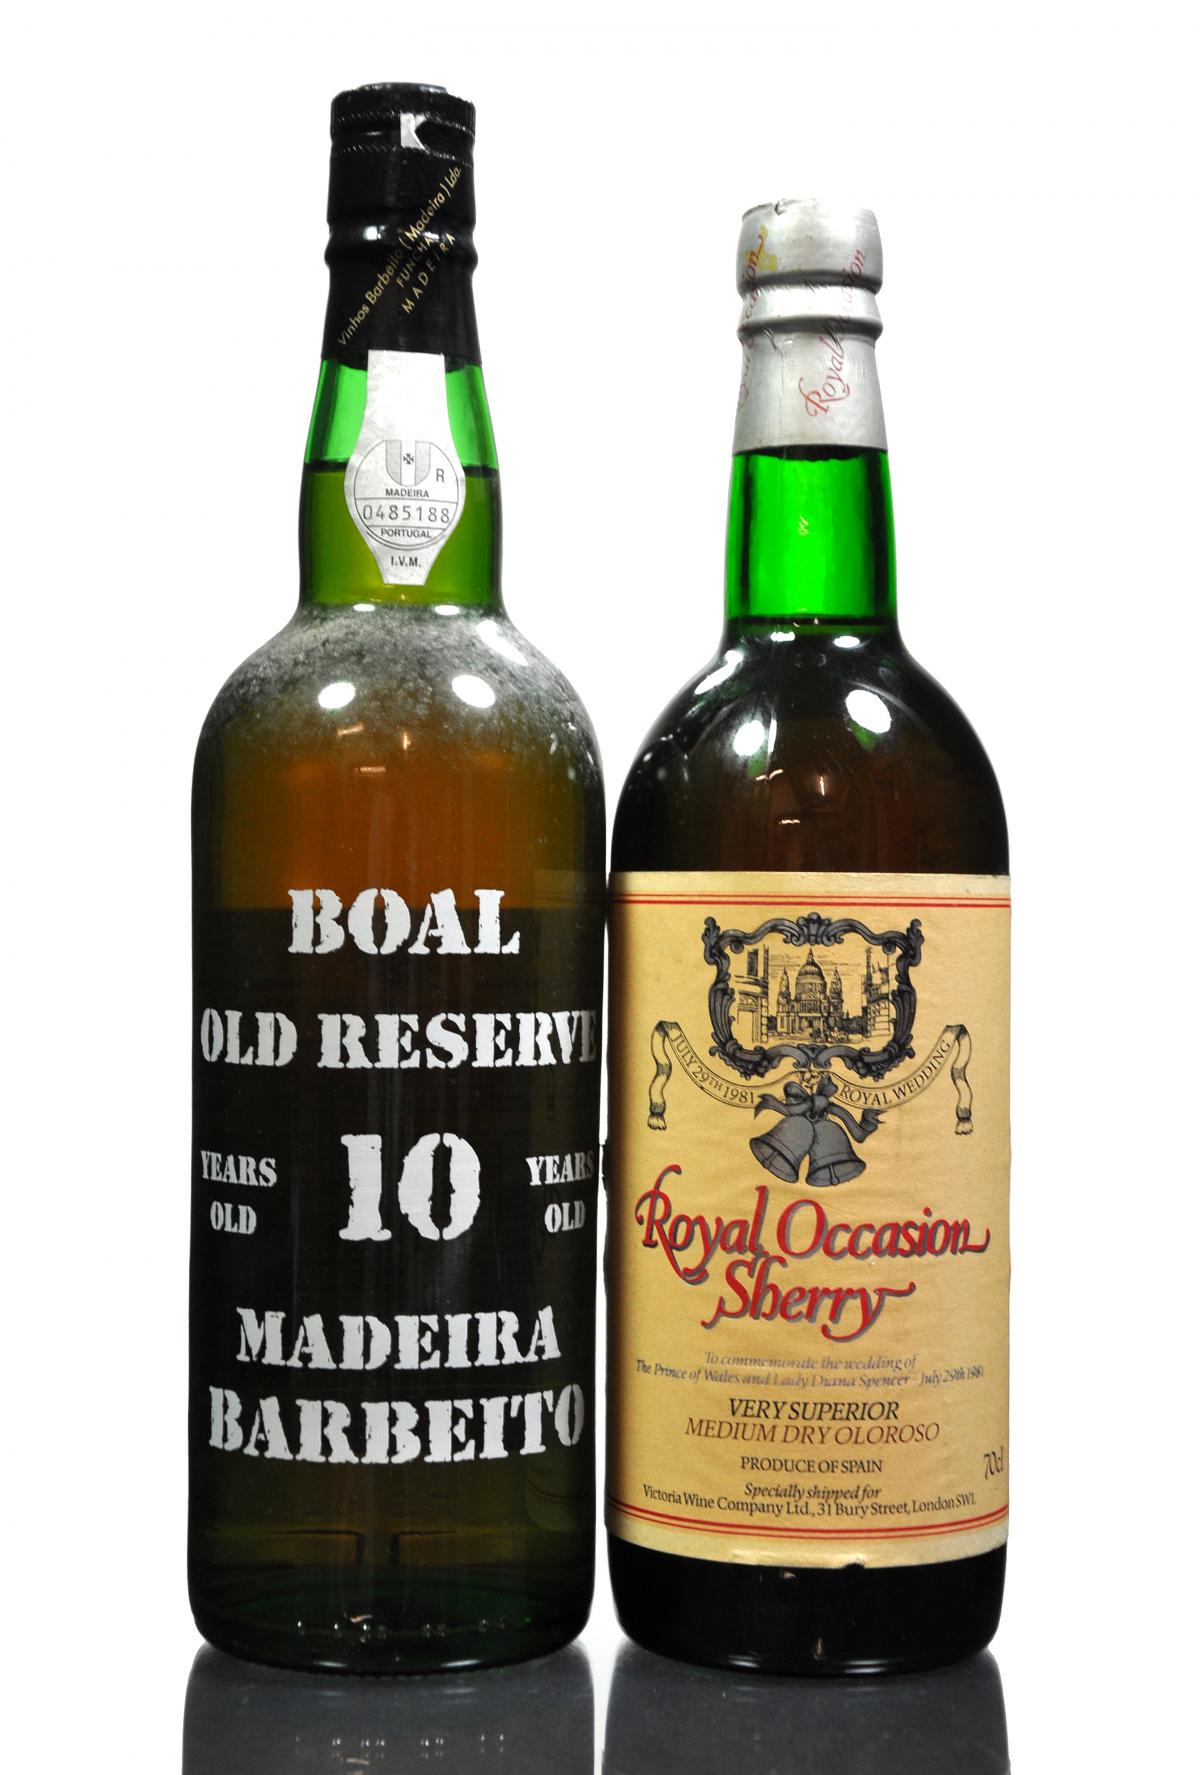 Royal Occasion Sherry & Boal 10 Year Old Madeira